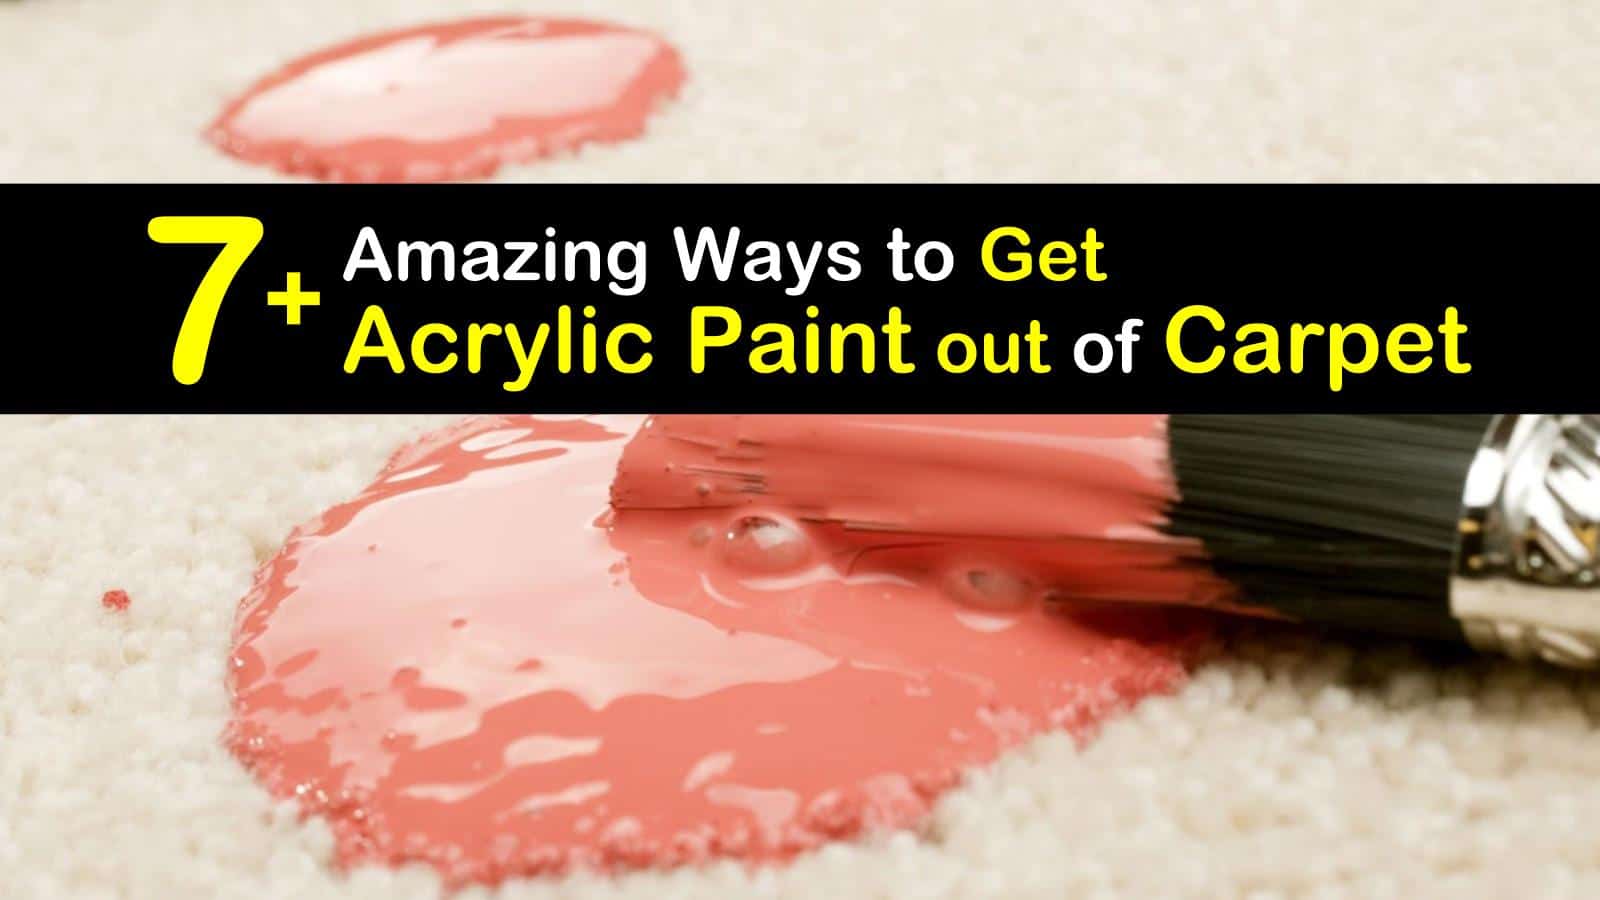 7+ Amazing Ways to Get Acrylic Paint out of Carpet